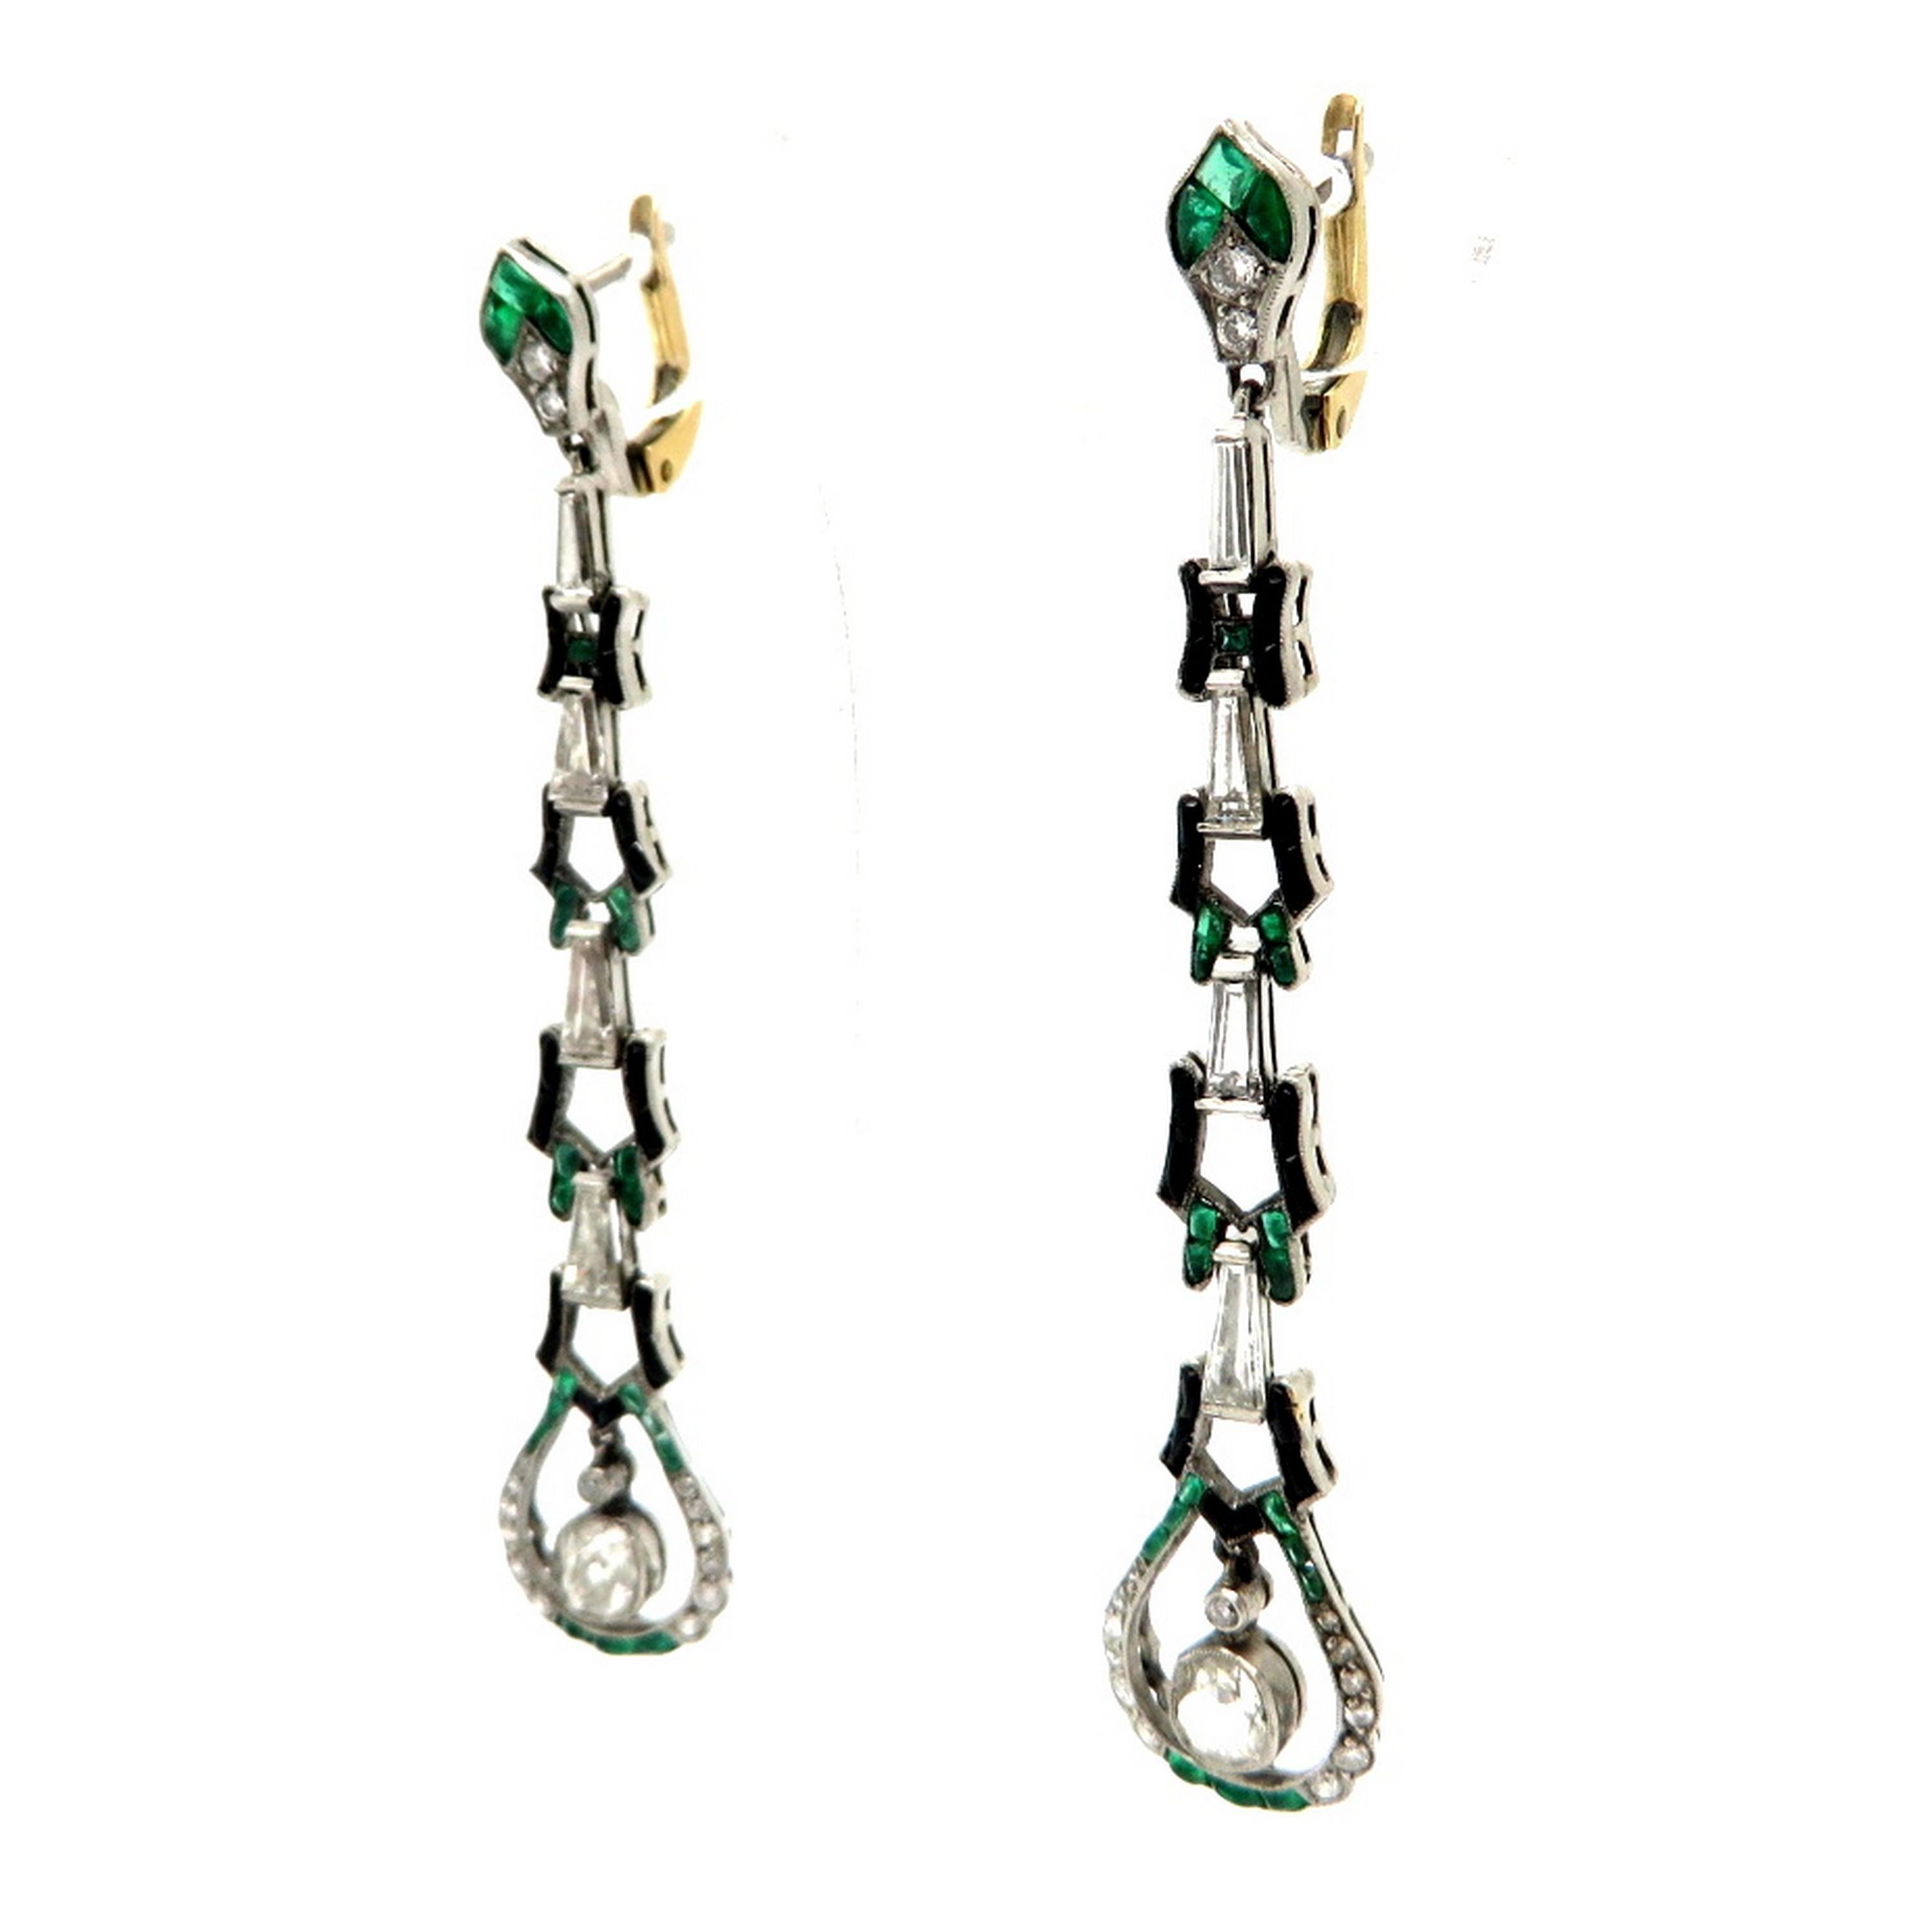 Estate Art Deco style platinum and 18K gold diamond, emerald and onyx dangle earrings. Showcasing two Old mine cut diamonds, weighing a total of 0.75 carats. Accented with 6 tapered baguette shaped diamonds weighing a combined total of 1.15 carats